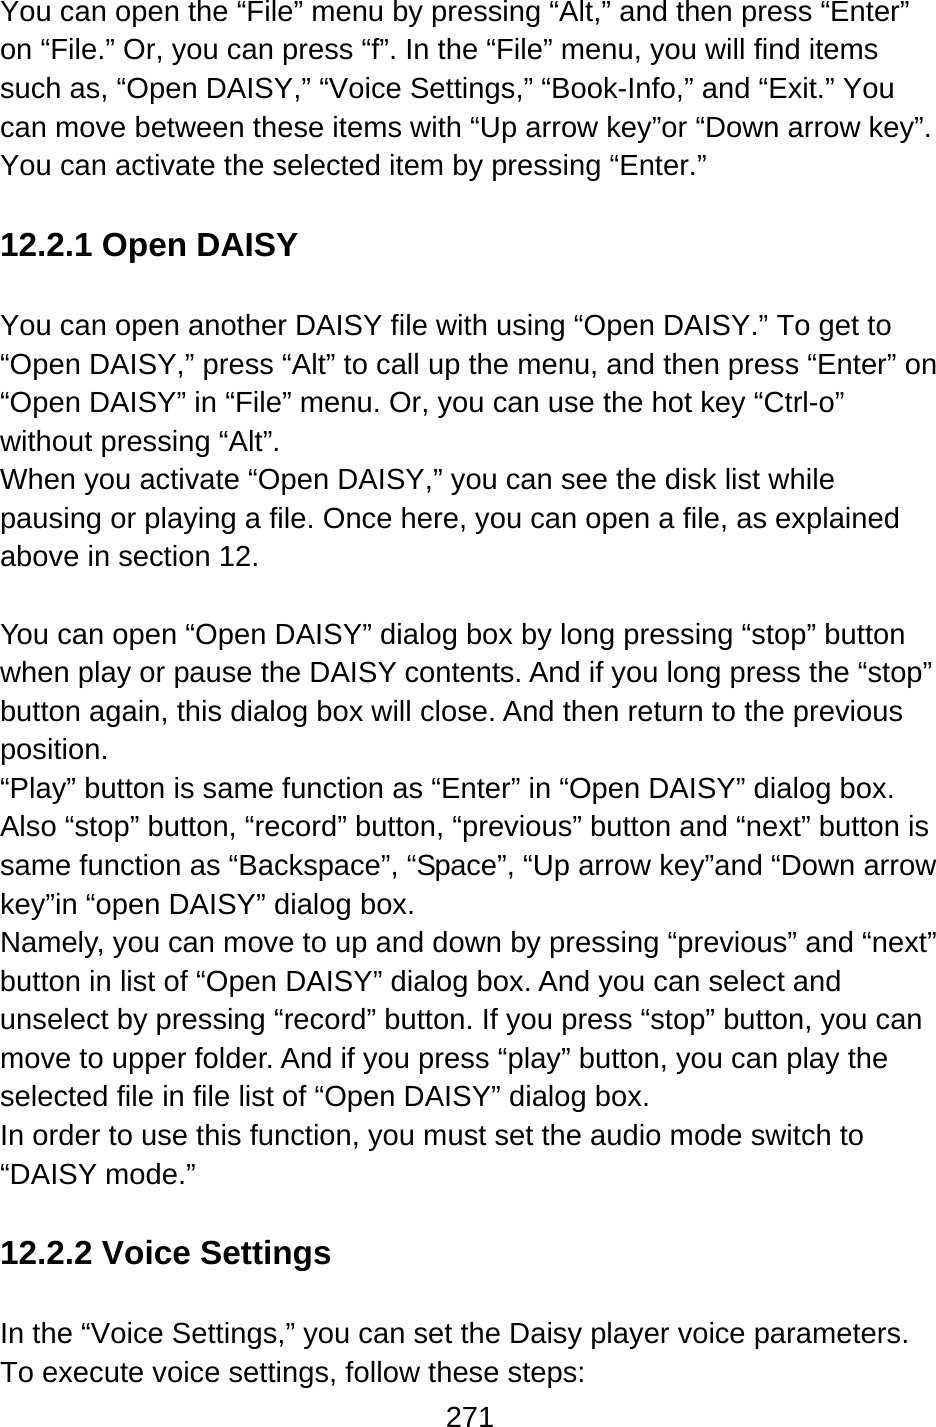 271  You can open the “File” menu by pressing “Alt,” and then press “Enter” on “File.” Or, you can press “f”. In the “File” menu, you will find items such as, “Open DAISY,” “Voice Settings,” “Book-Info,” and “Exit.” You can move between these items with “Up arrow key”or “Down arrow key”.   You can activate the selected item by pressing “Enter.”  12.2.1 Open DAISY  You can open another DAISY file with using “Open DAISY.” To get to “Open DAISY,” press “Alt” to call up the menu, and then press “Enter” on “Open DAISY” in “File” menu. Or, you can use the hot key “Ctrl-o” without pressing “Alt”. When you activate “Open DAISY,” you can see the disk list while pausing or playing a file. Once here, you can open a file, as explained above in section 12.  You can open “Open DAISY” dialog box by long pressing “stop” button when play or pause the DAISY contents. And if you long press the “stop” button again, this dialog box will close. And then return to the previous position. “Play” button is same function as “Enter” in “Open DAISY” dialog box. Also “stop” button, “record” button, “previous” button and “next” button is same function as “Backspace”, “Space”, “Up arrow key”and “Down arrow key”in “open DAISY” dialog box. Namely, you can move to up and down by pressing “previous” and “next” button in list of “Open DAISY” dialog box. And you can select and unselect by pressing “record” button. If you press “stop” button, you can move to upper folder. And if you press “play” button, you can play the selected file in file list of “Open DAISY” dialog box. In order to use this function, you must set the audio mode switch to “DAISY mode.”  12.2.2 Voice Settings  In the “Voice Settings,” you can set the Daisy player voice parameters.     To execute voice settings, follow these steps: 